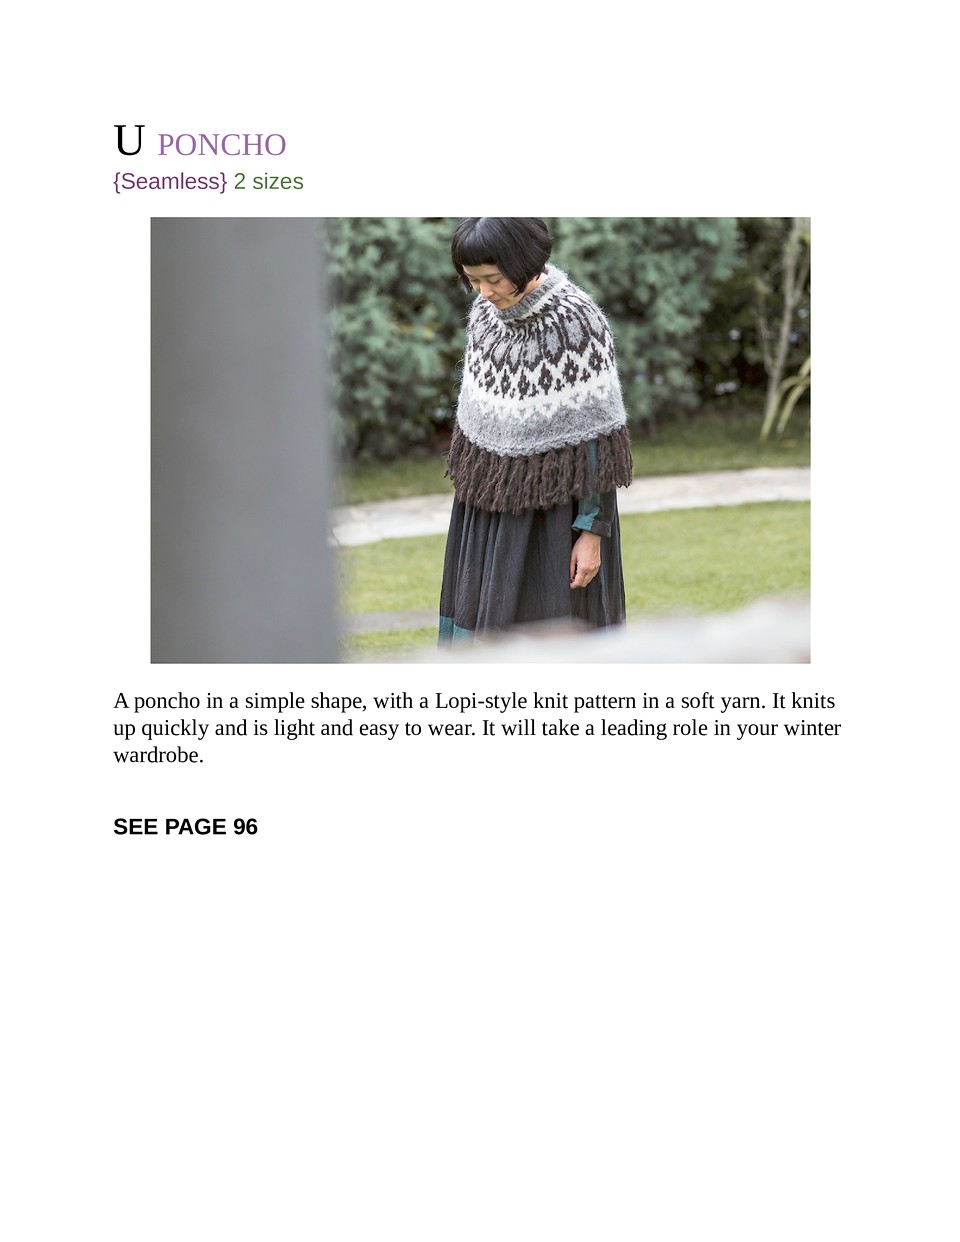 Japanese Knitting Patterns for Sweaters Scarves and More-65